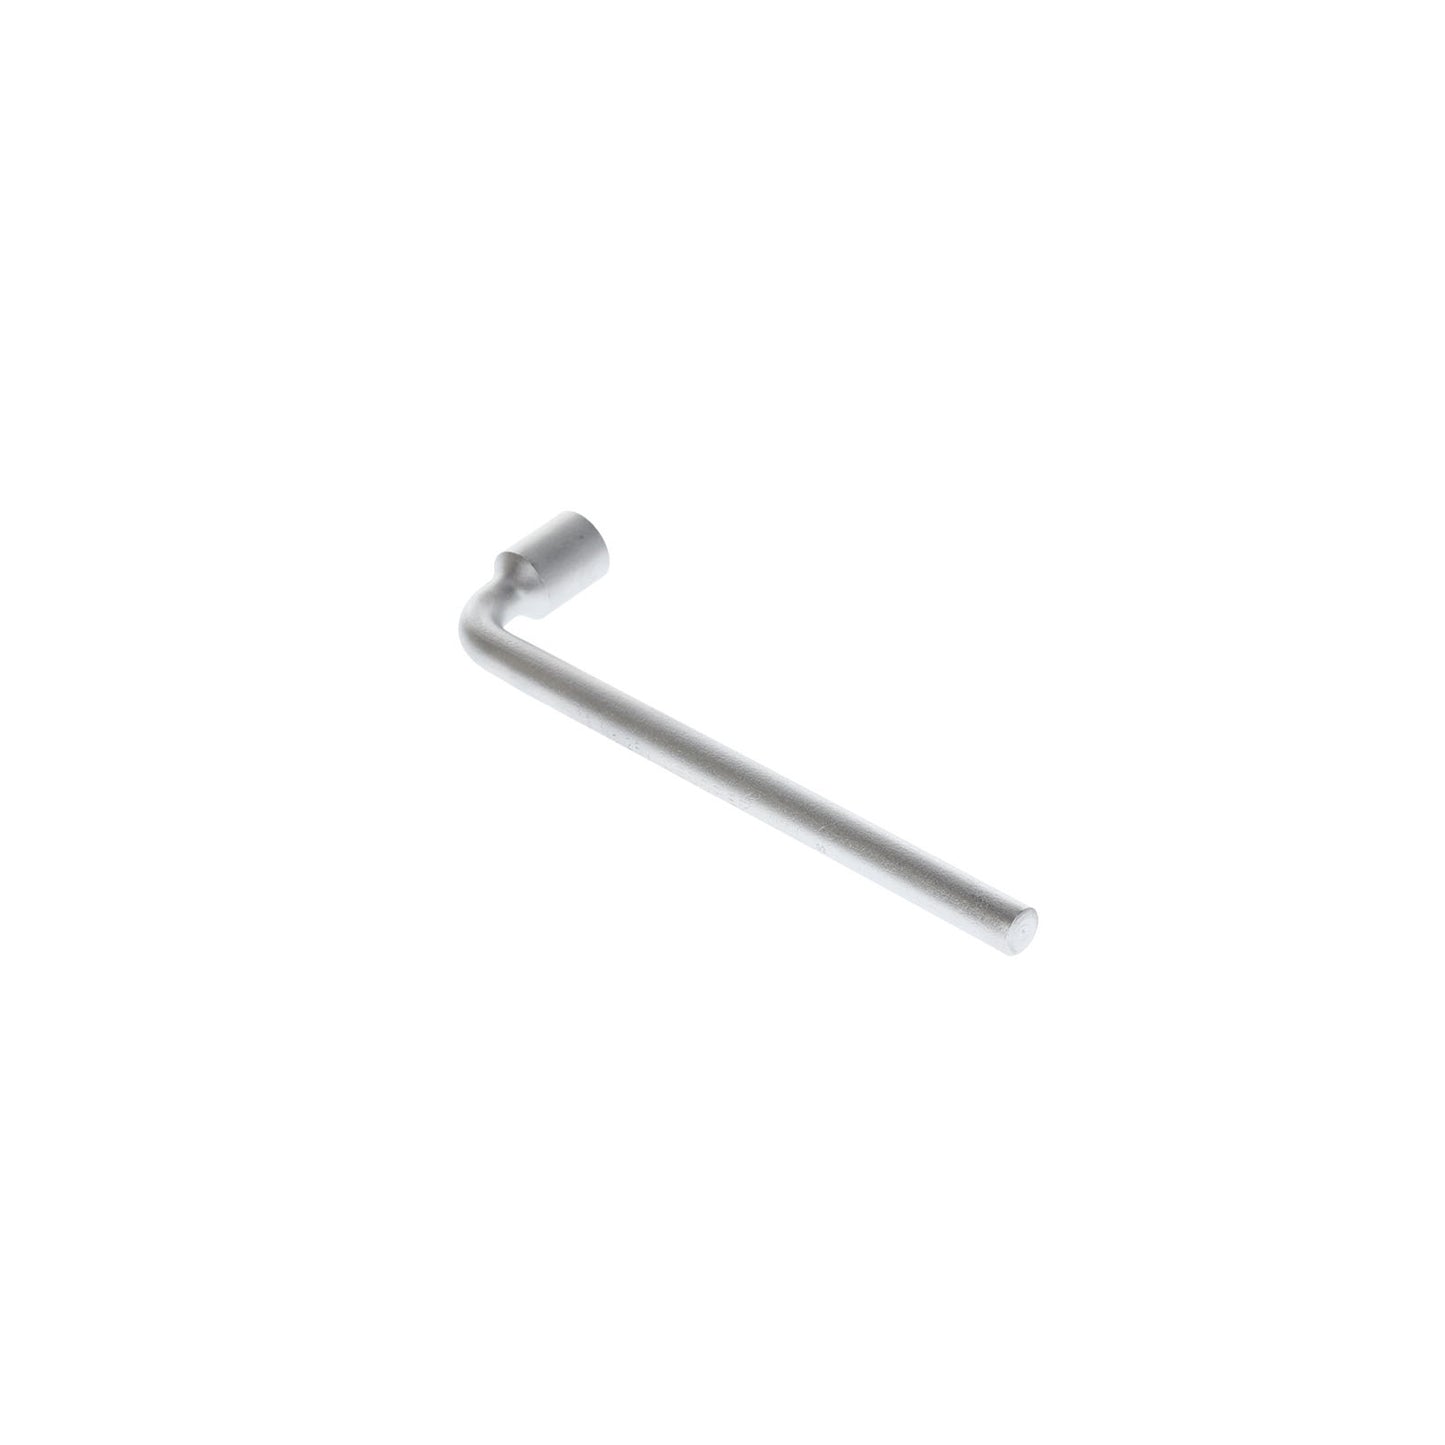 GEDORE 25 V 13 - Square Profile Wrench, 13mm (6195230)